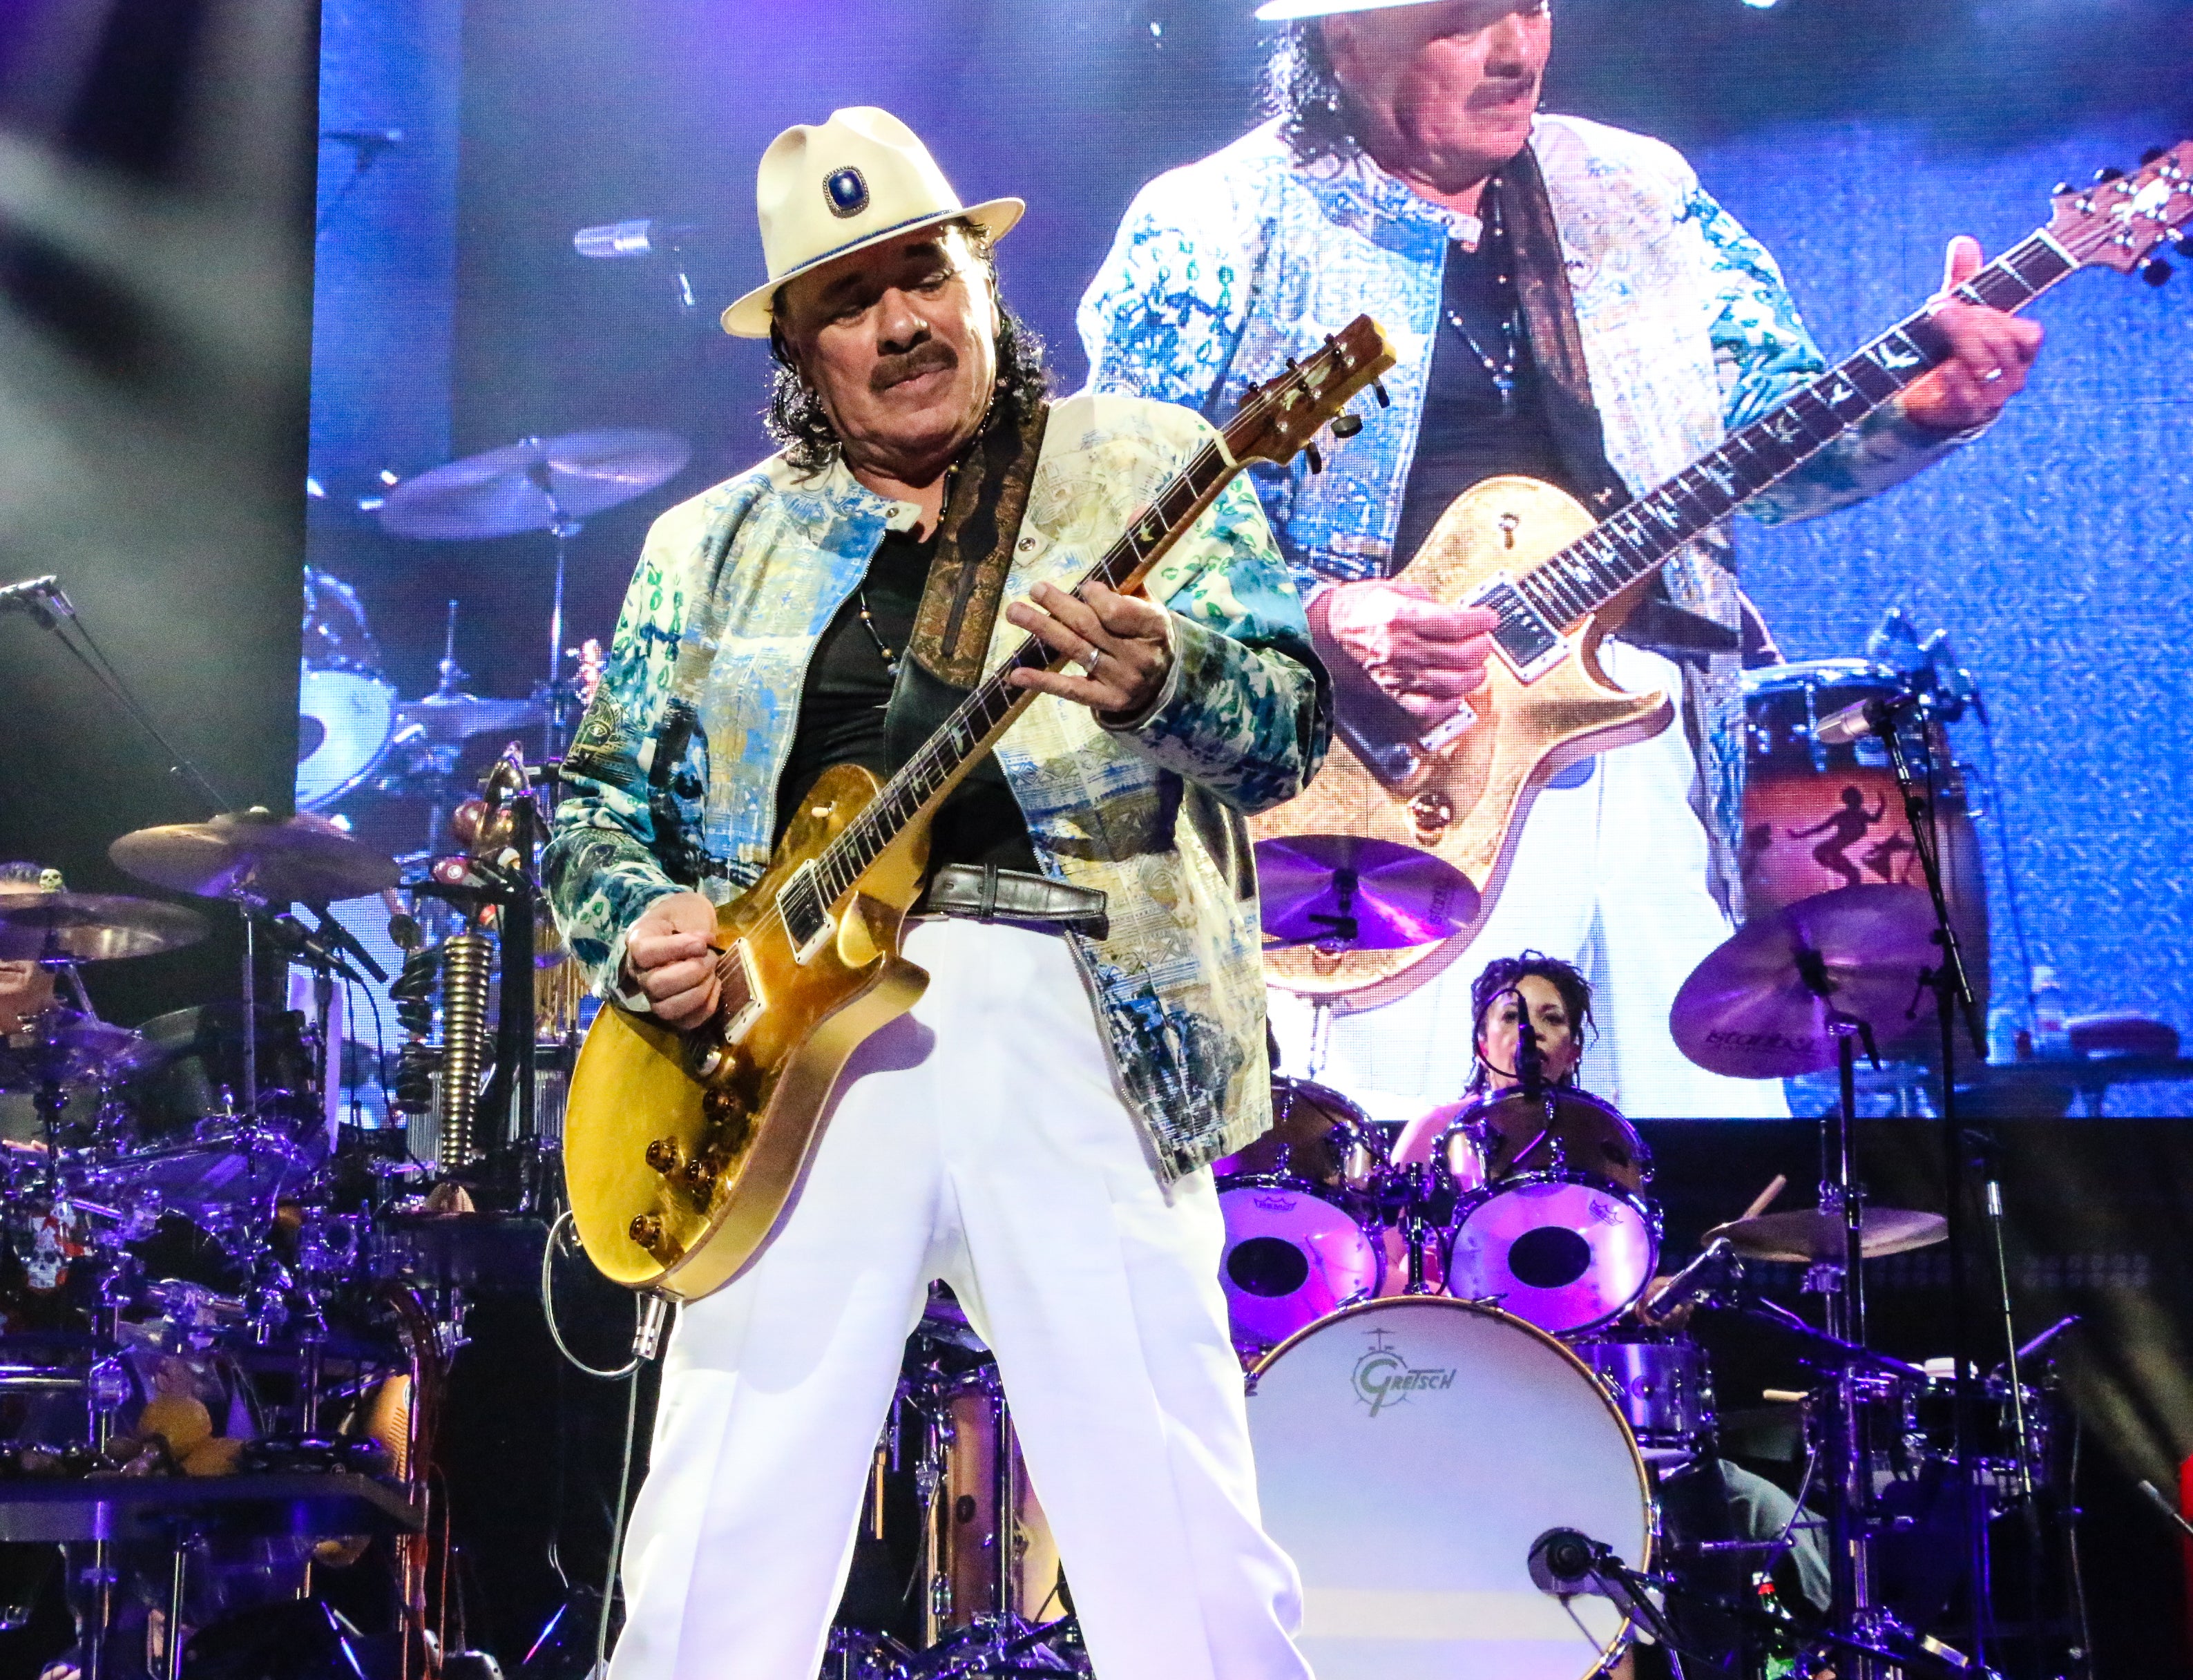 Cannabis flower loving celebrity Santana plays his yellow guitar on stage with his band.